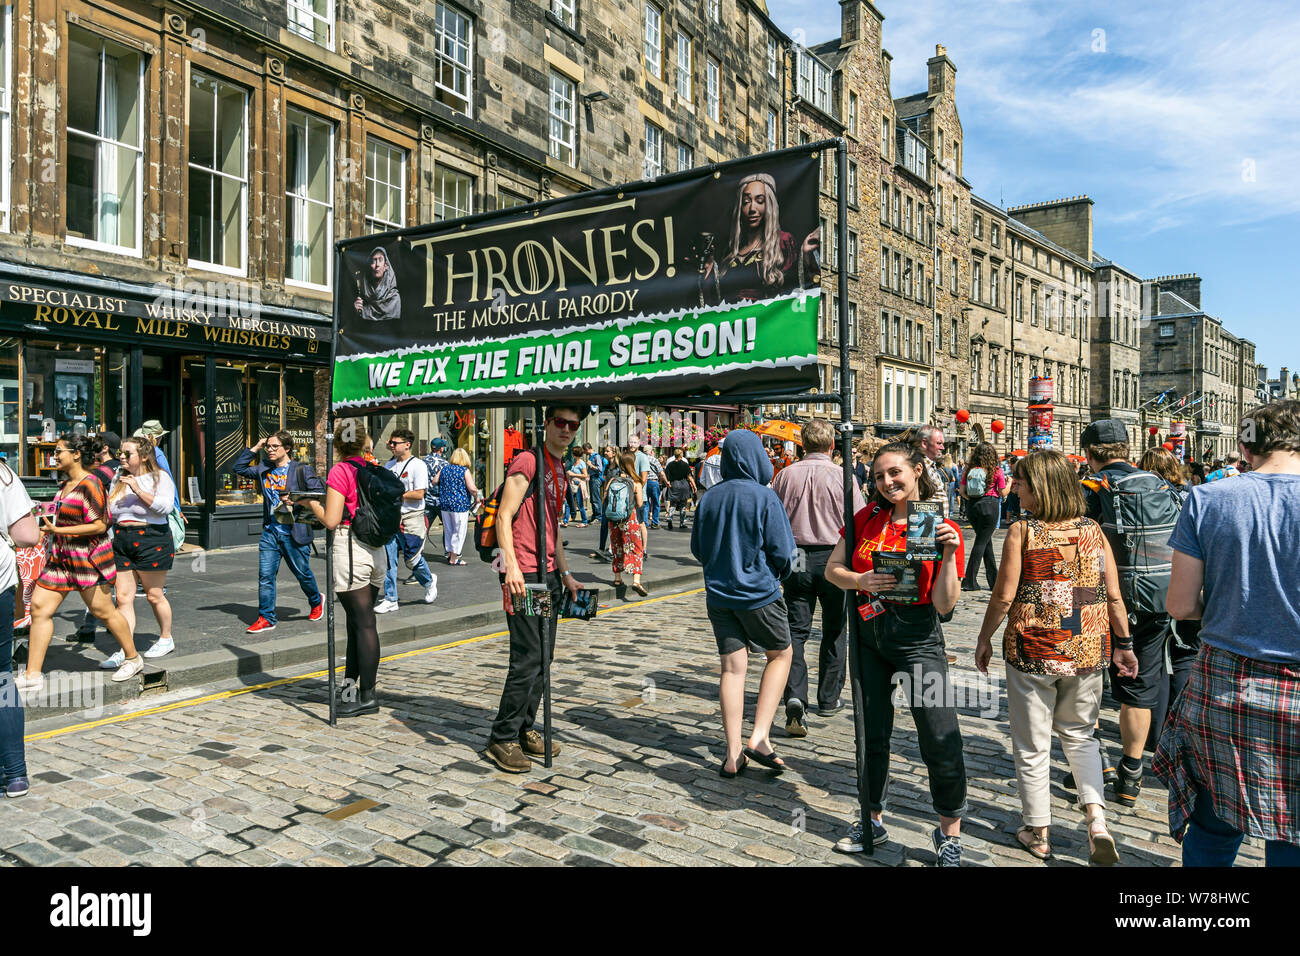 Thrones! The Musical Parody group promoting their musical comedy show at Edinburgh Festival Fringe 2019 in the Royal Mile Edinburgh Scotland UK Stock Photo